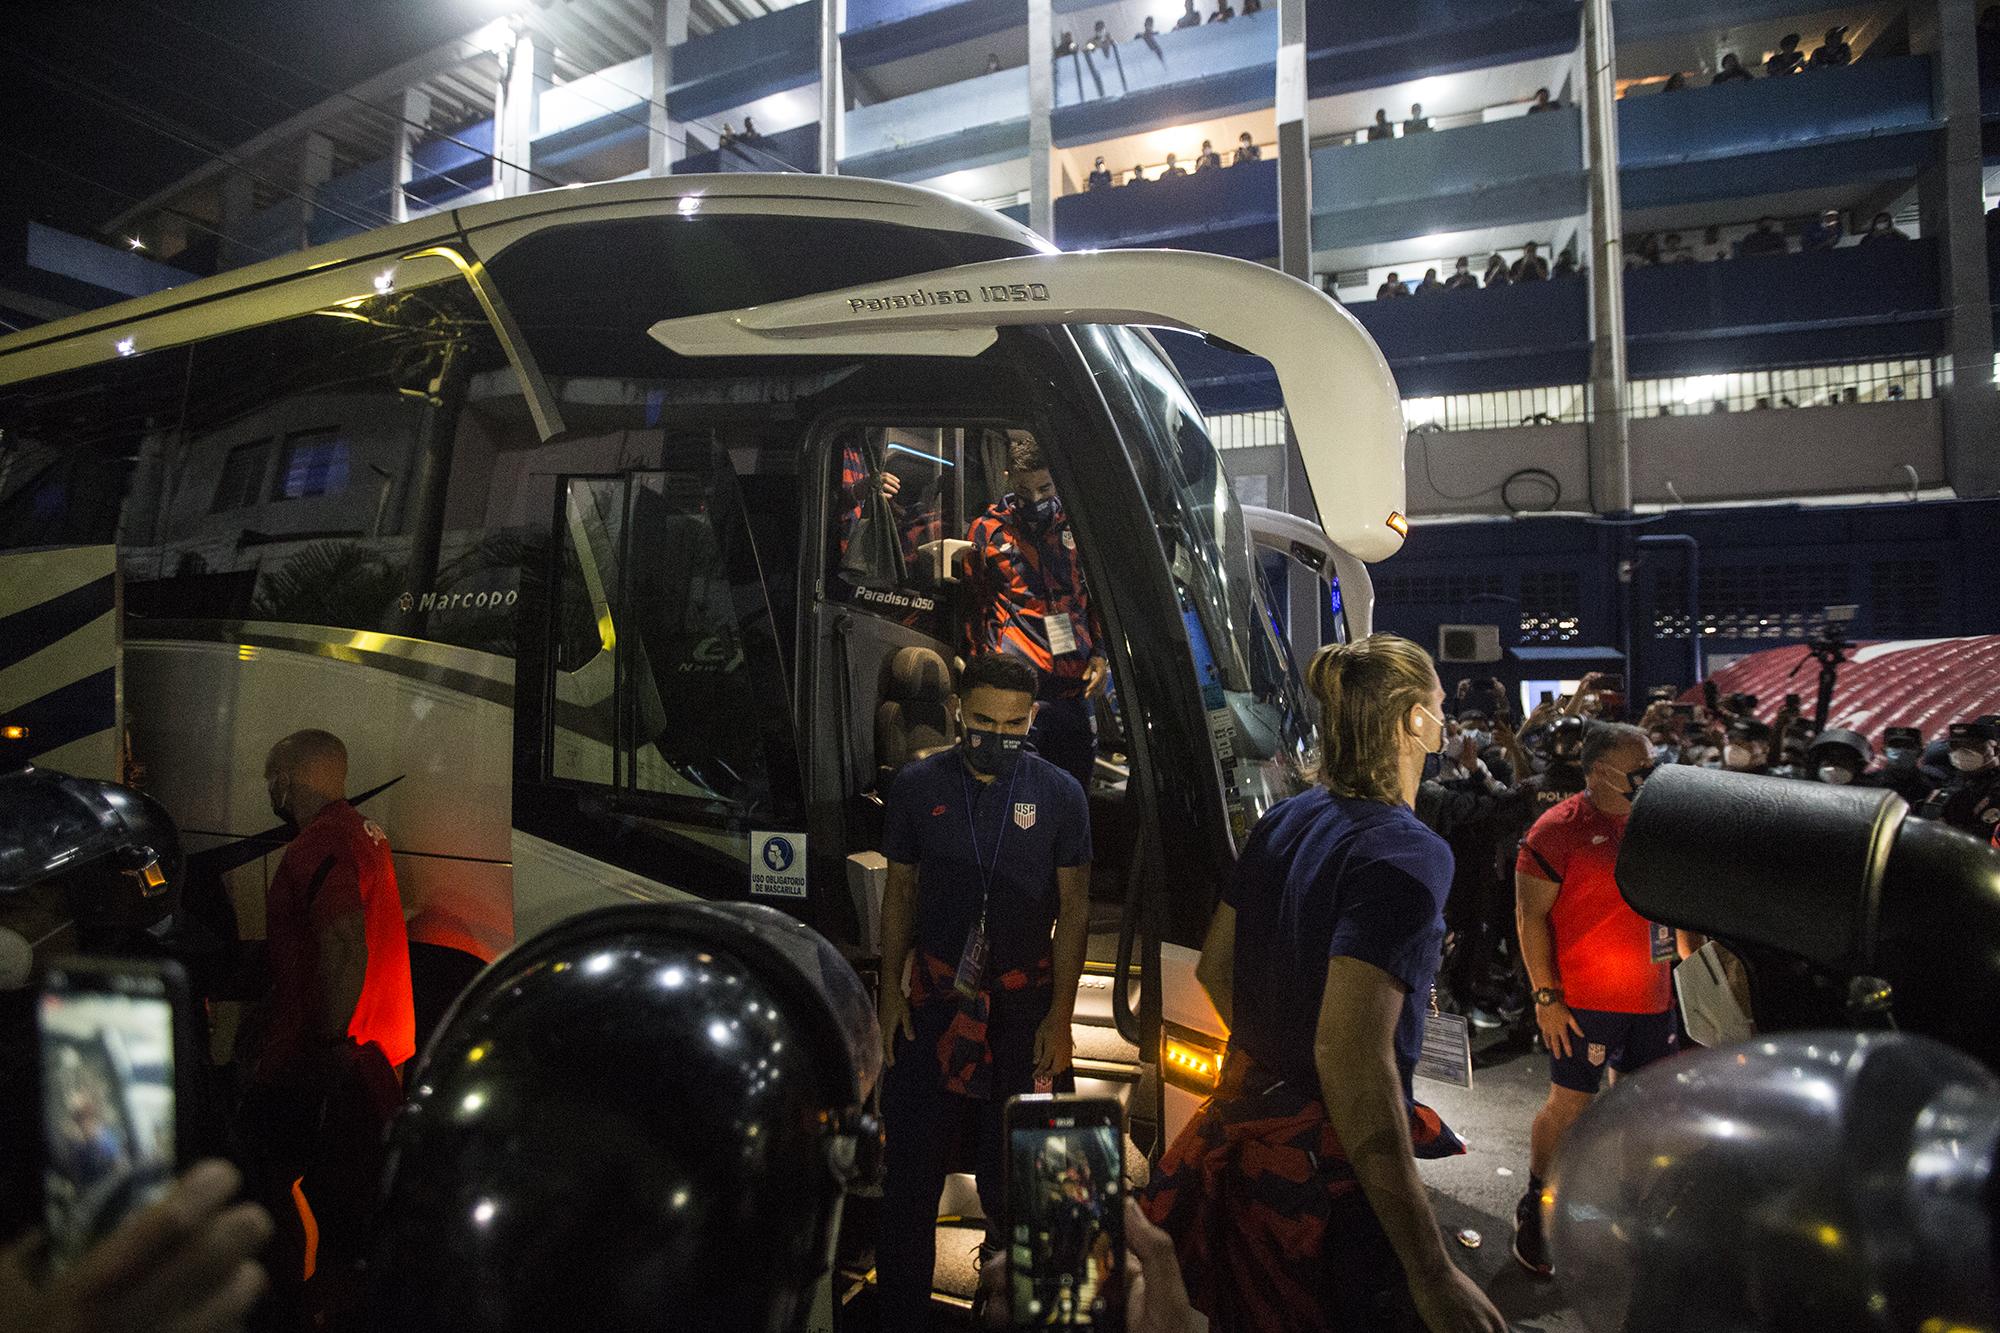 Cristian Roldán arrives at the stadium 20 minutes after his brother. Fans lob insults at him and the other U.S. players: “Cristian, fucking racist,” yelled one Salvadoran fan when Roldán stepped off the bus.